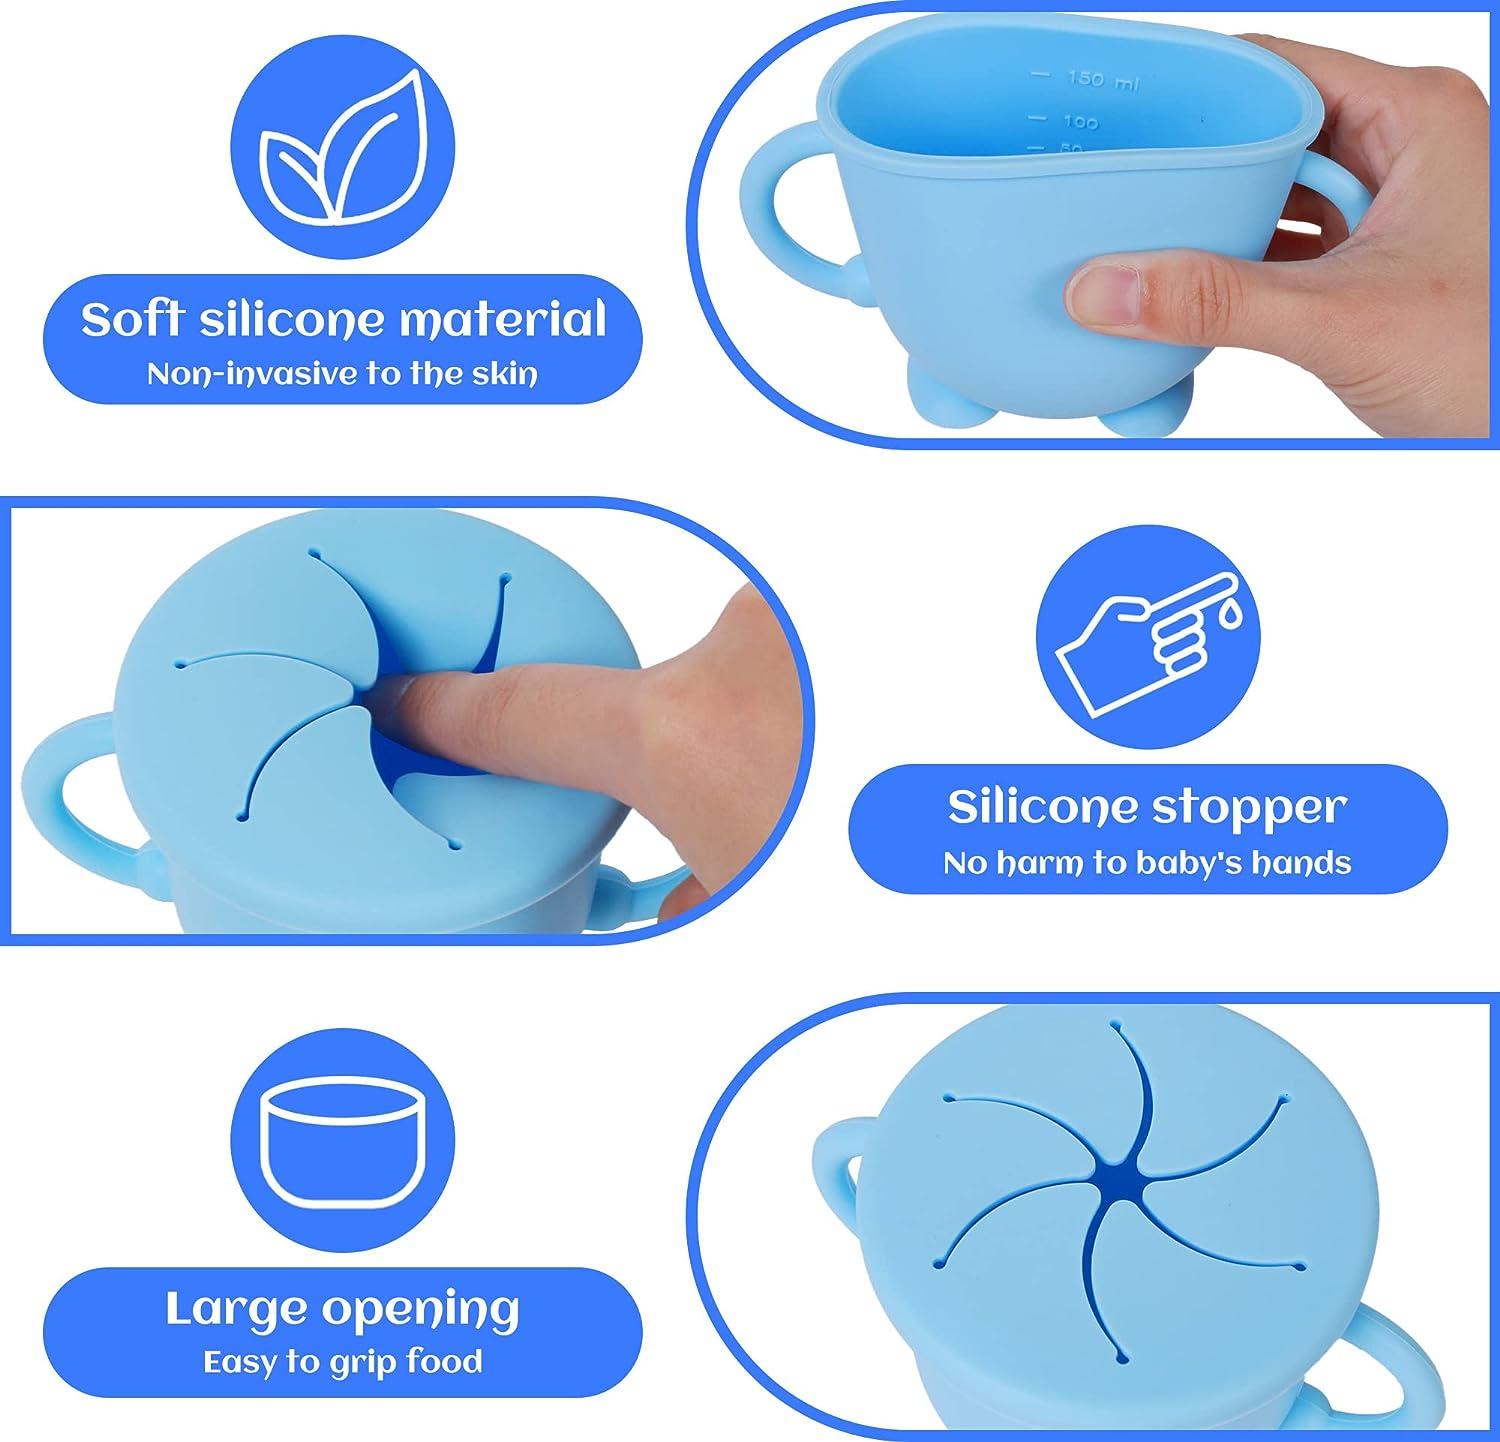 Silicone Spill Proof Snack Cups (Baby Blue) – Penguinni